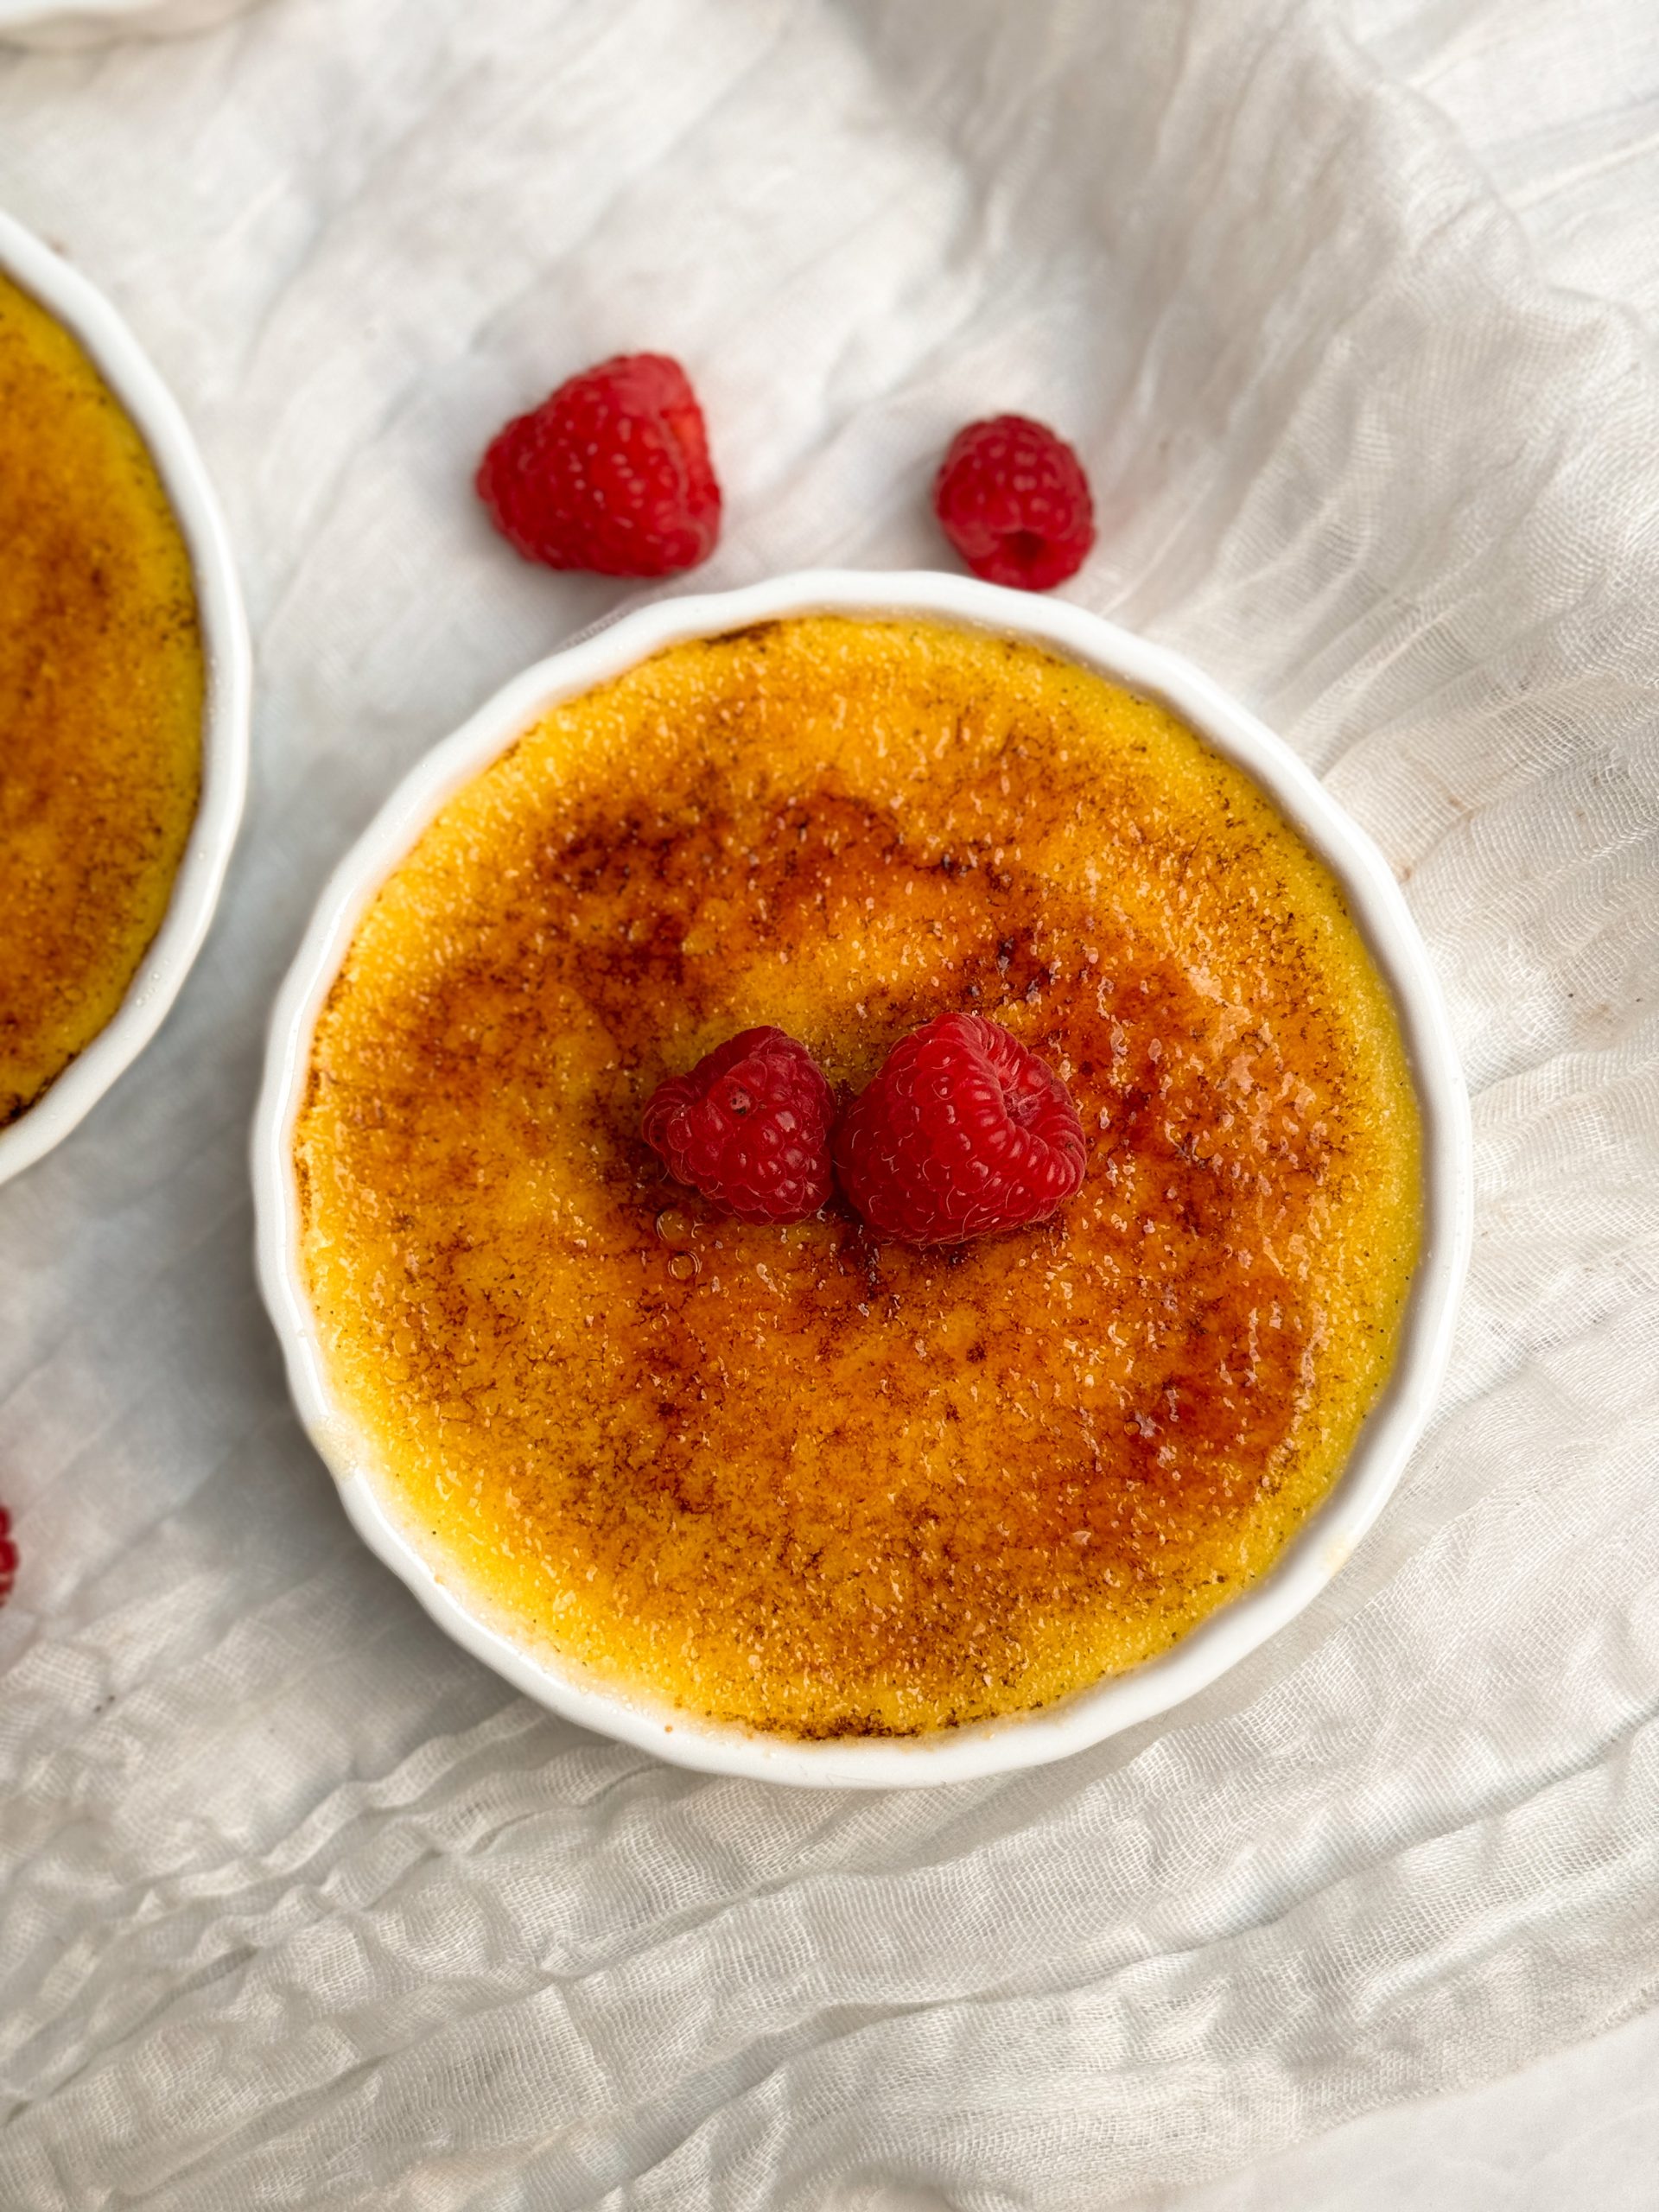 Overhead picture of Creme brulee in a white ramekin with a golden crispy sugar coating, decorated with raspberries